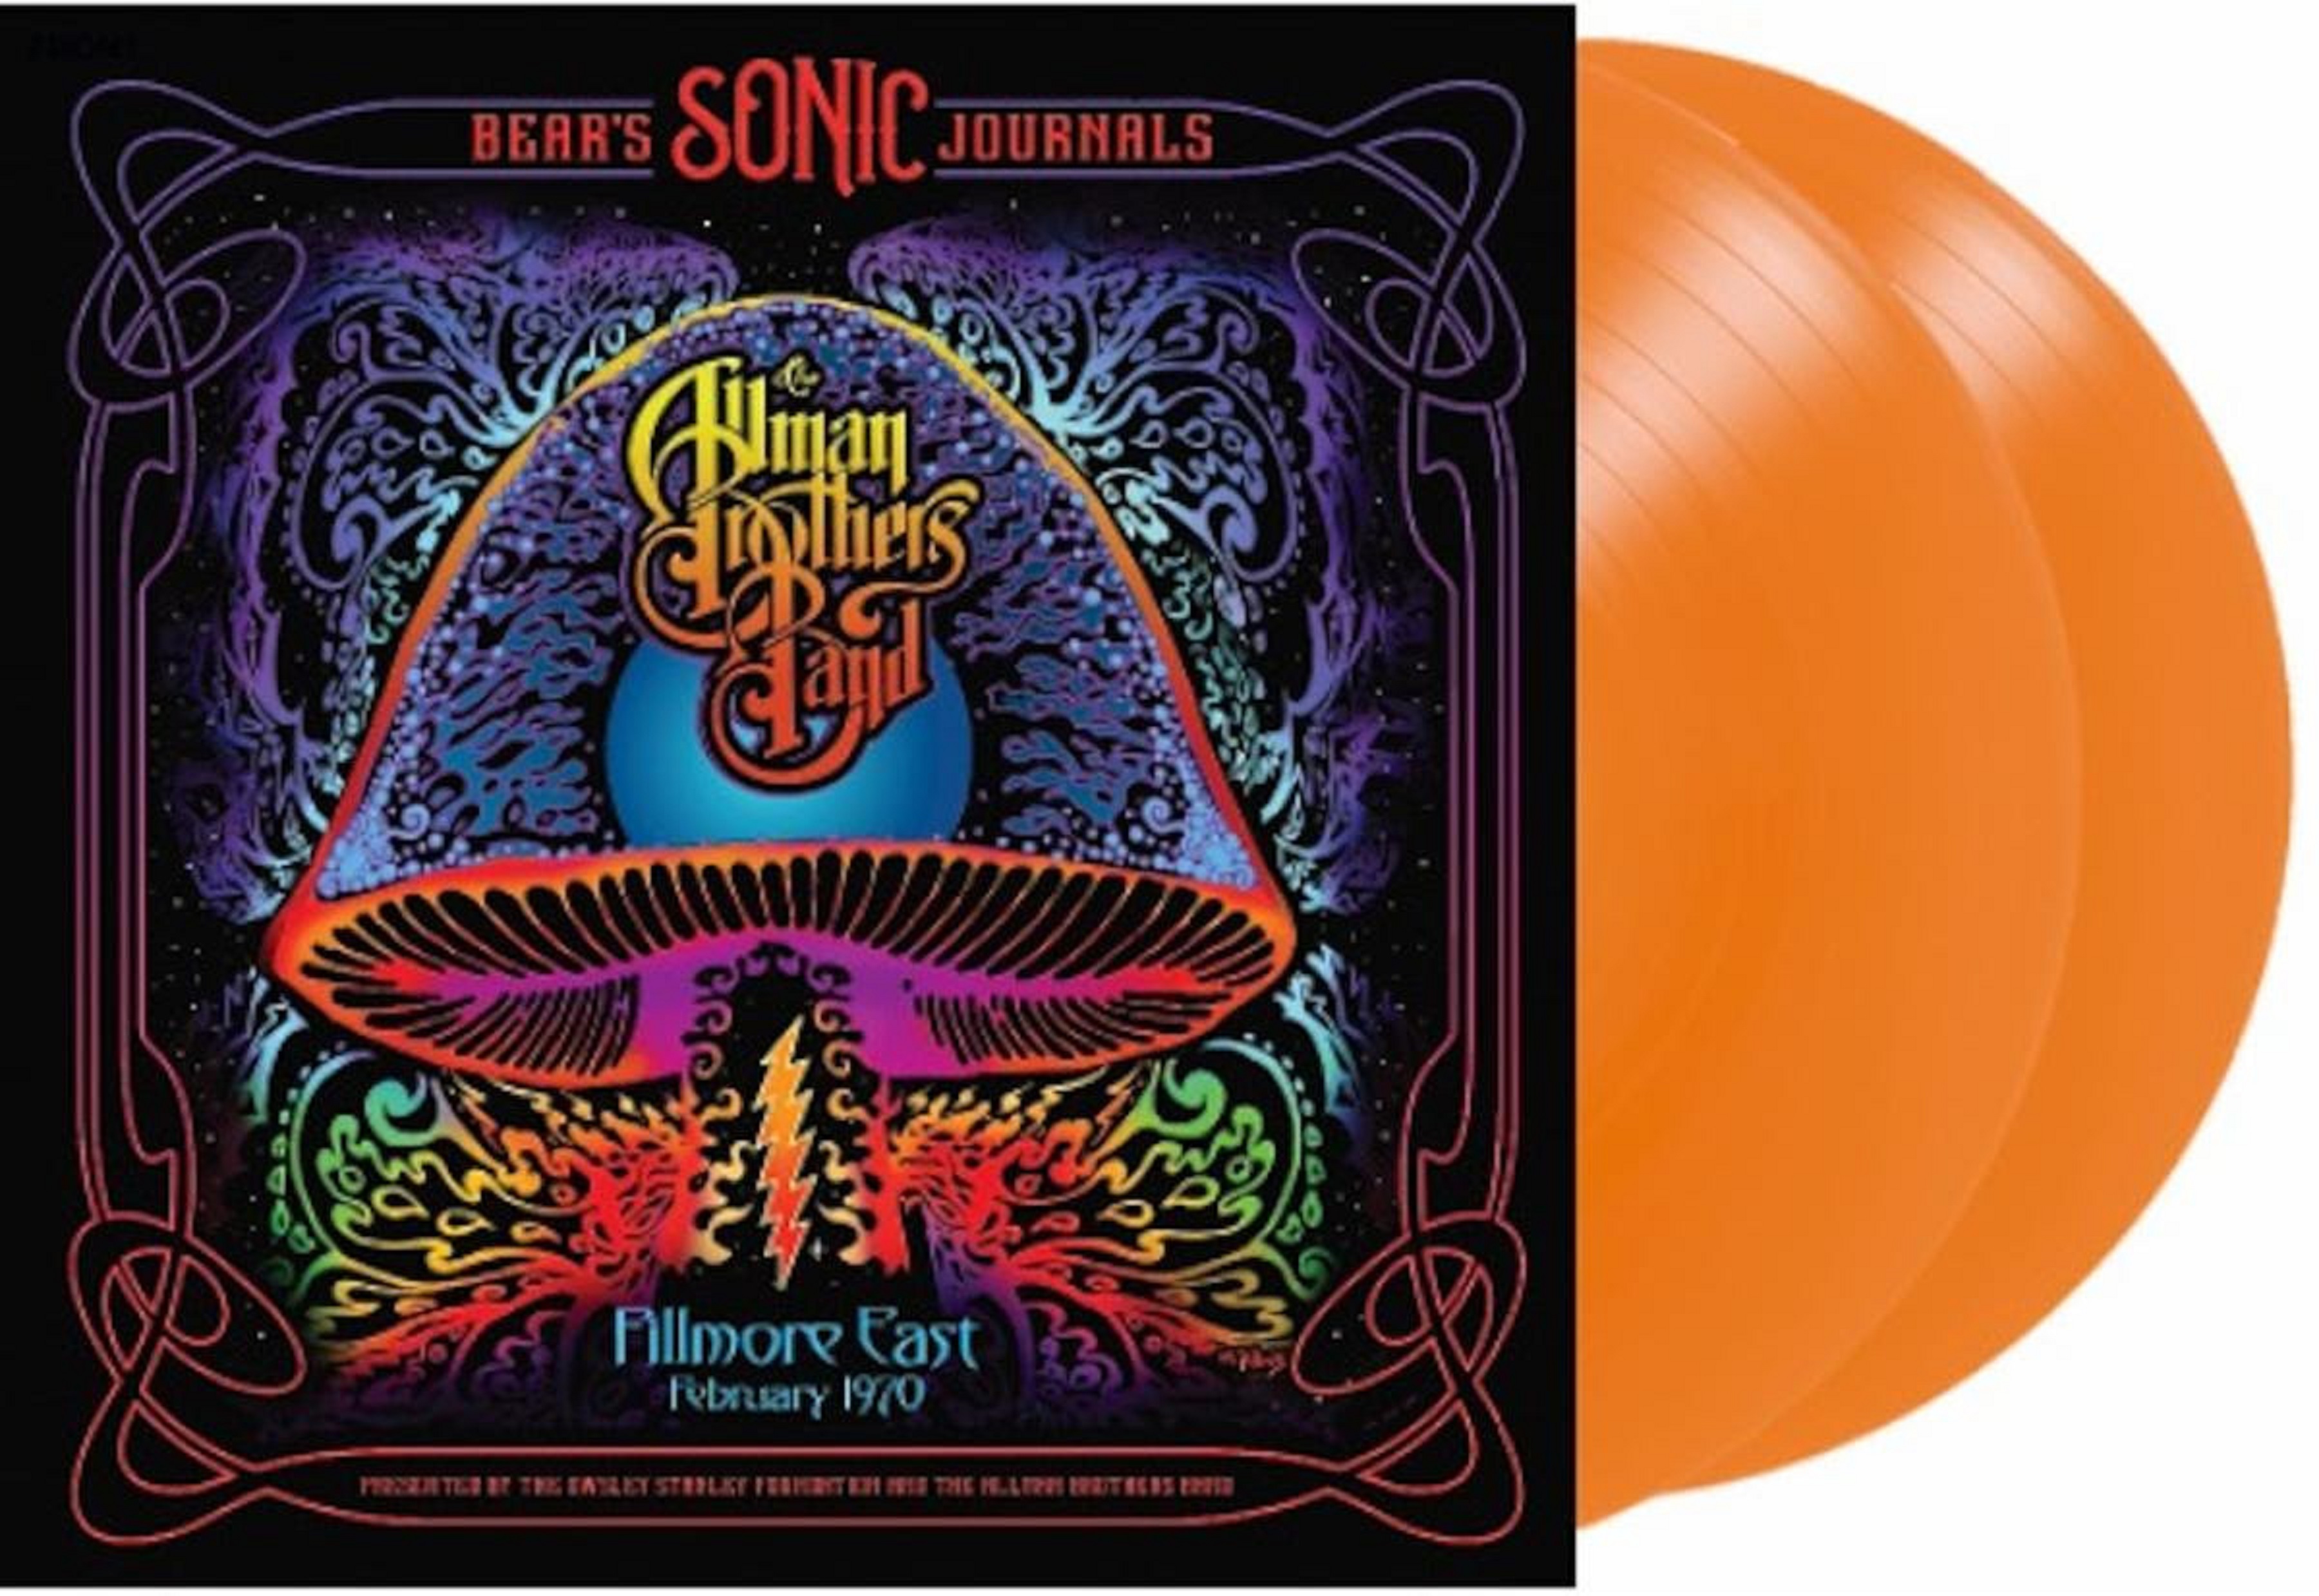 Allman Brothers Band & Owsley Stanley Foundation To Release Exclusive 2-LP Limited Run “Orange Sunshine” Vinyl 'Bear’s Sonic Journals: Allman Brothers Band Fillmore East February 1970' Out November 3